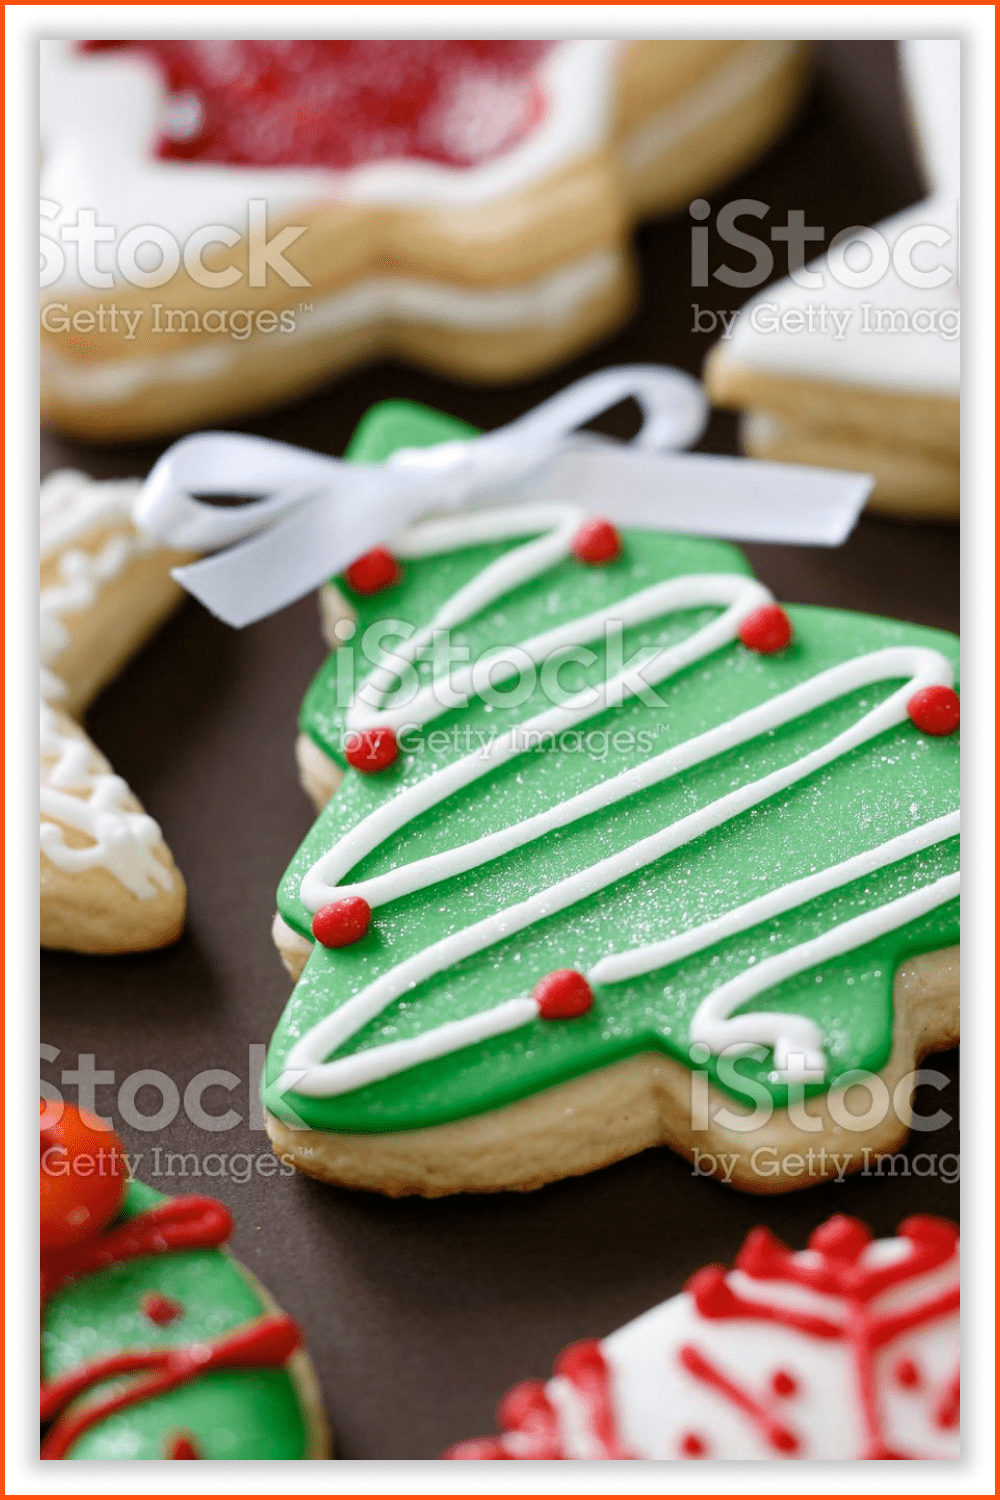 Cookies in different shapes of Christmas trees, wreaths, and stars.